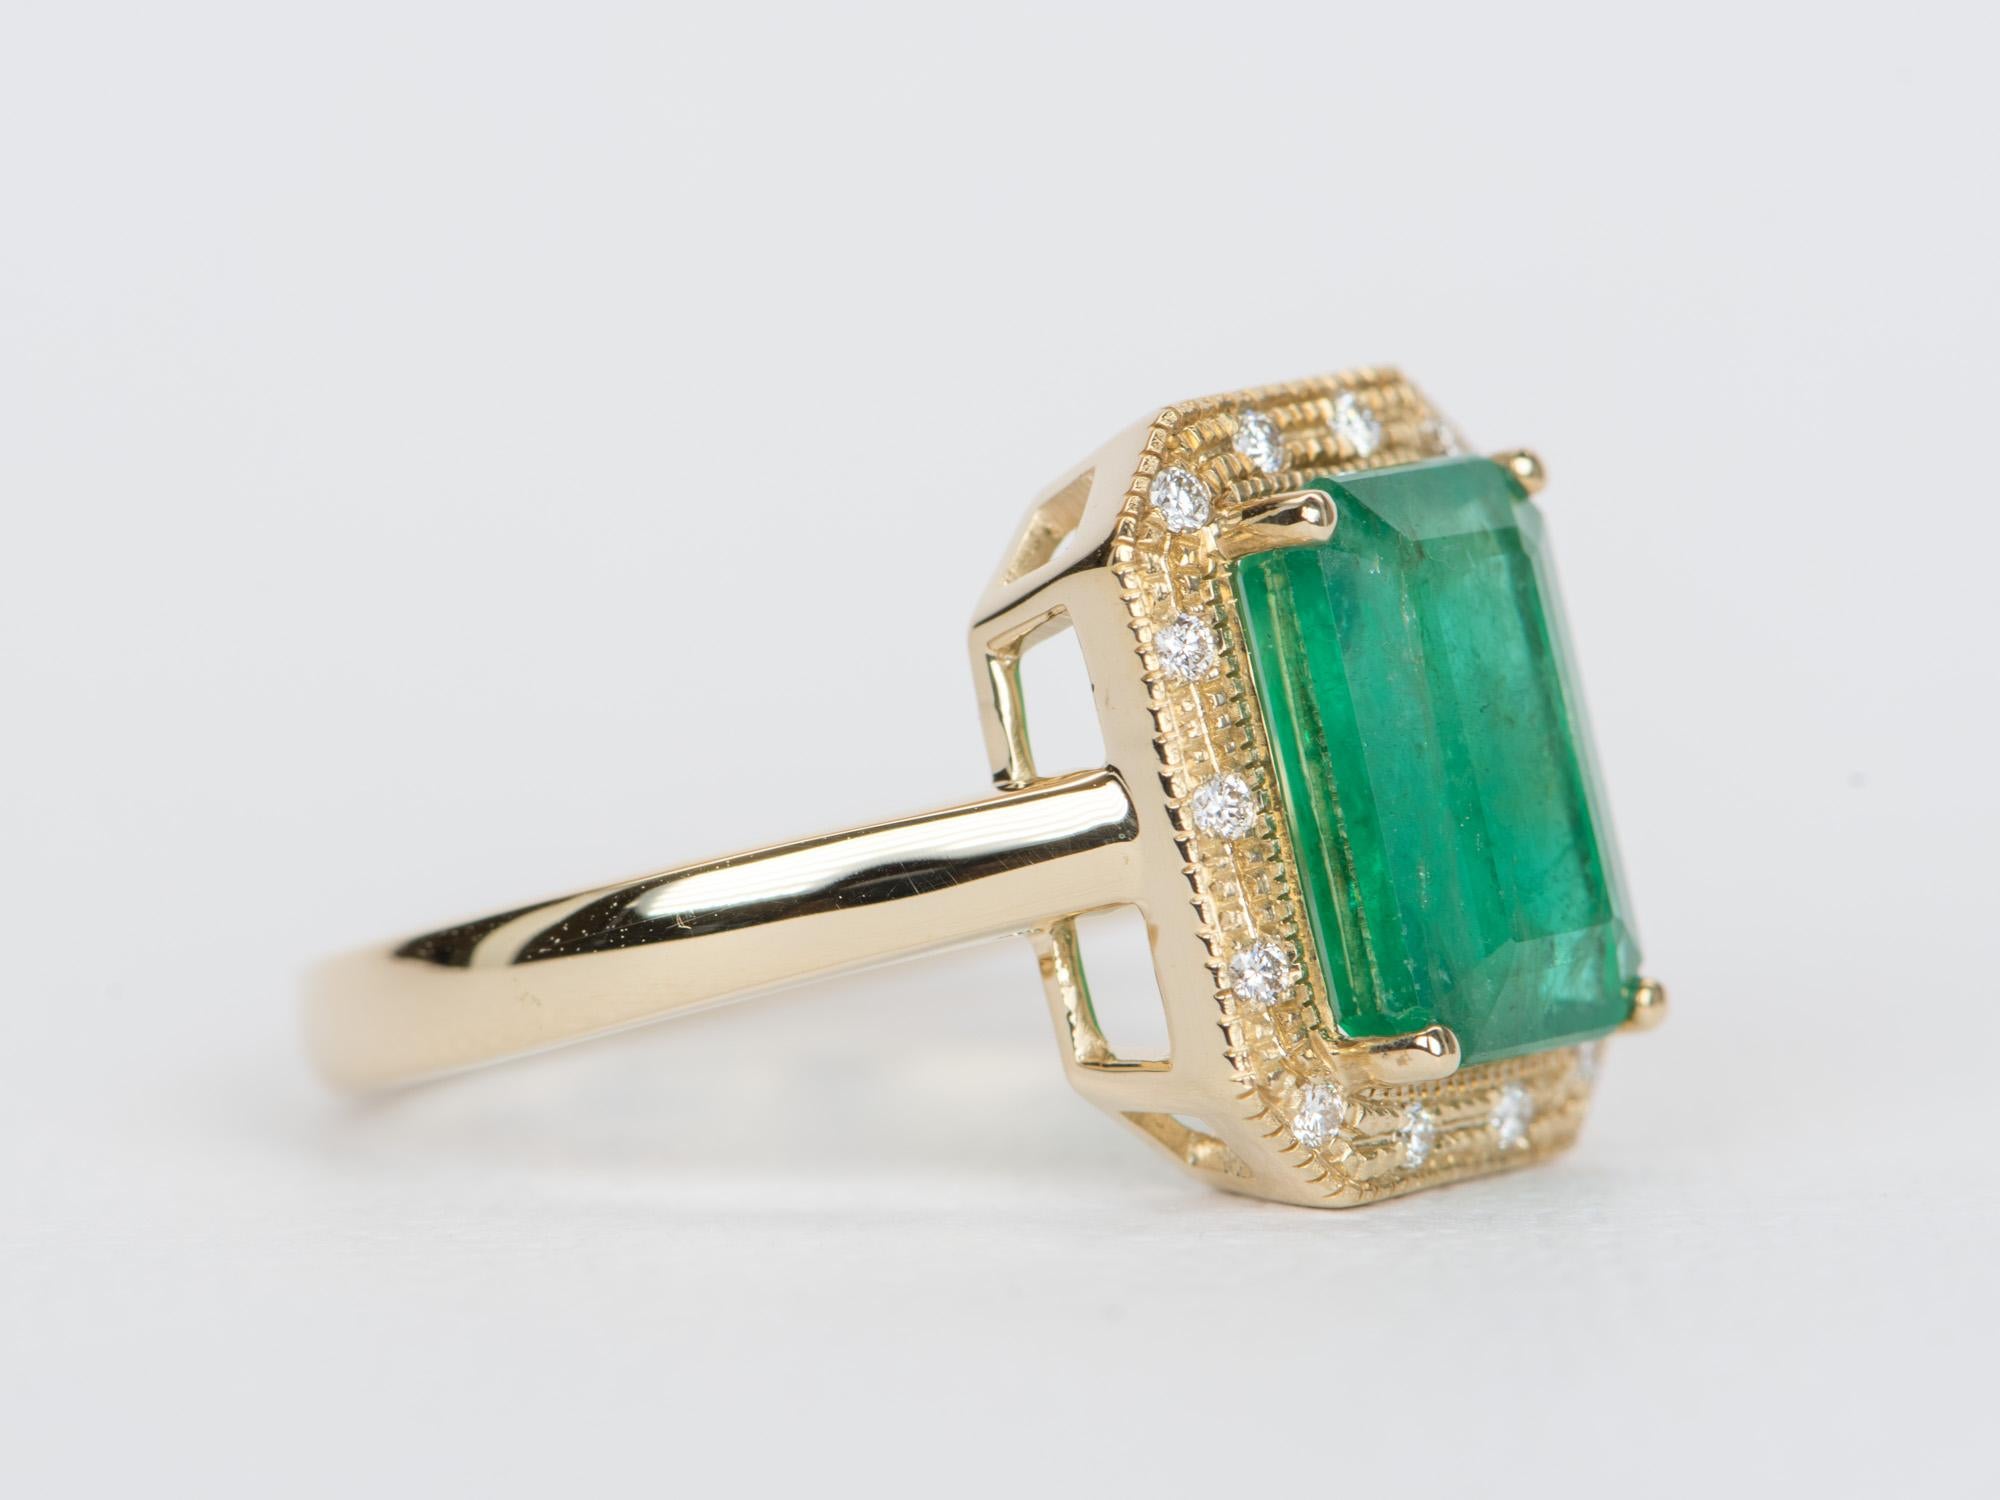 Emerald Cut 3.31ct Emerald with Diamond Halo 14K Yellow Gold Ring R6359 For Sale